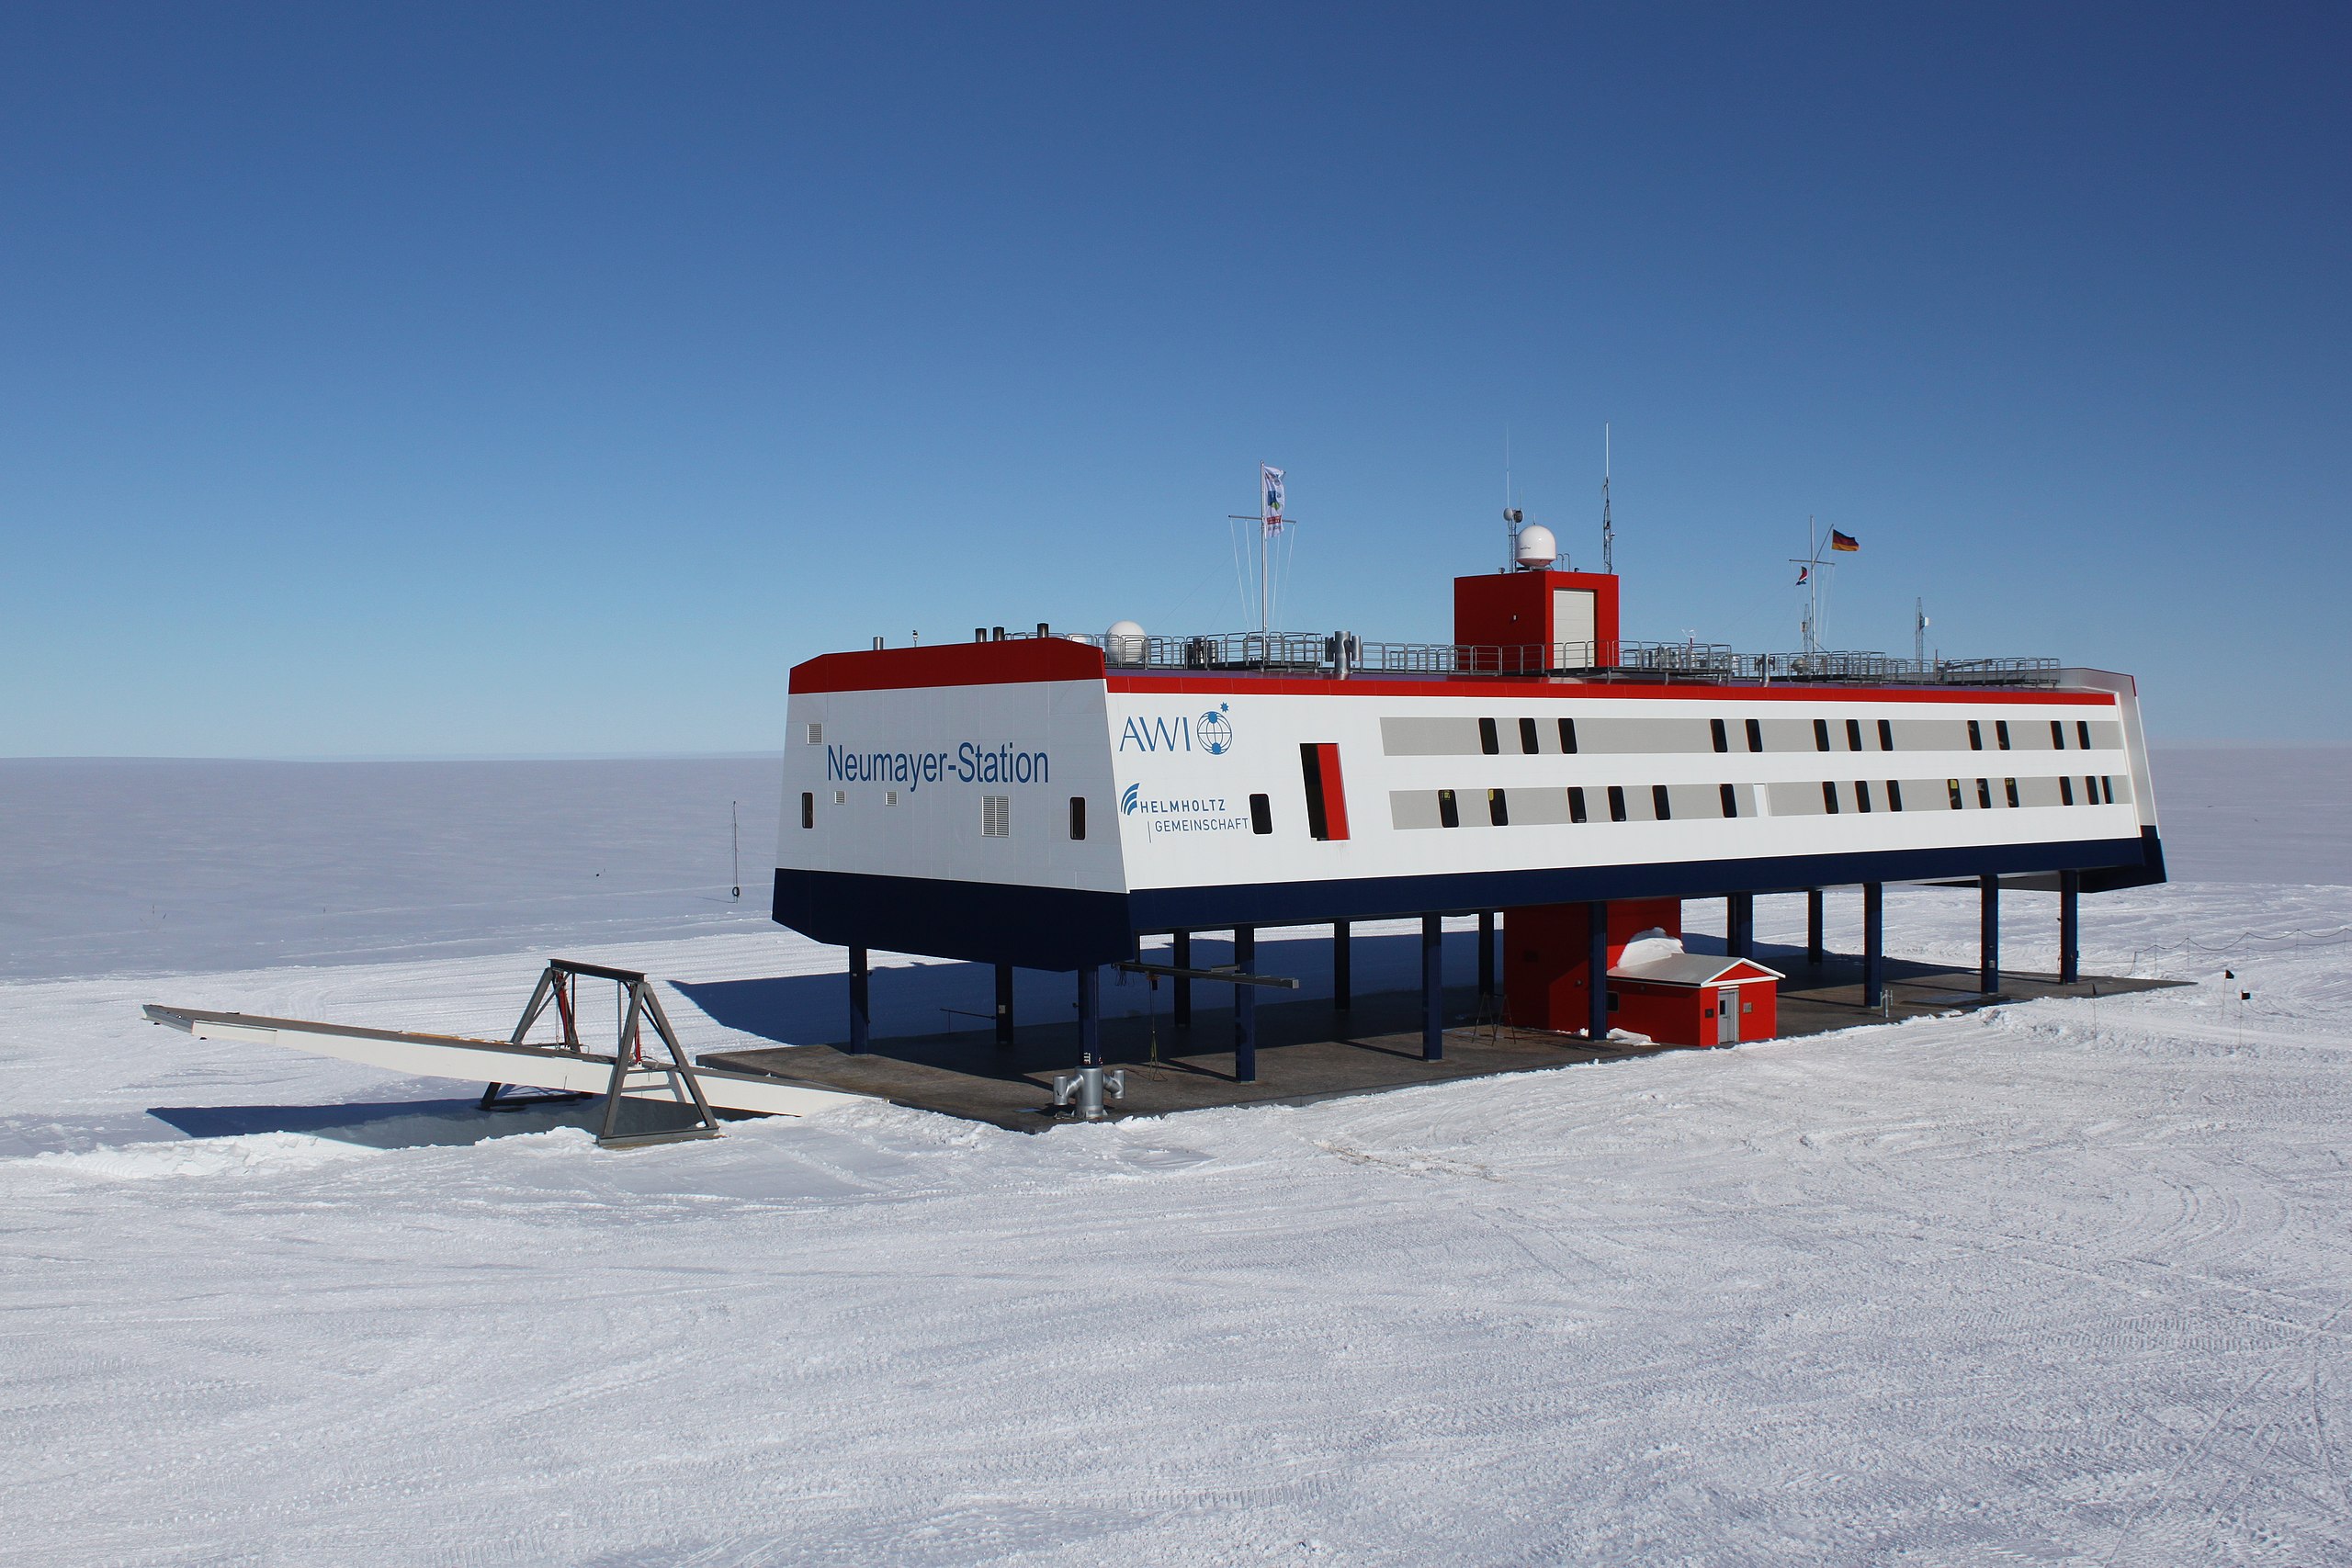 Neumayer III Station in December 2009. Photo by Felix Riess. CC BY-SA 3.0 de.